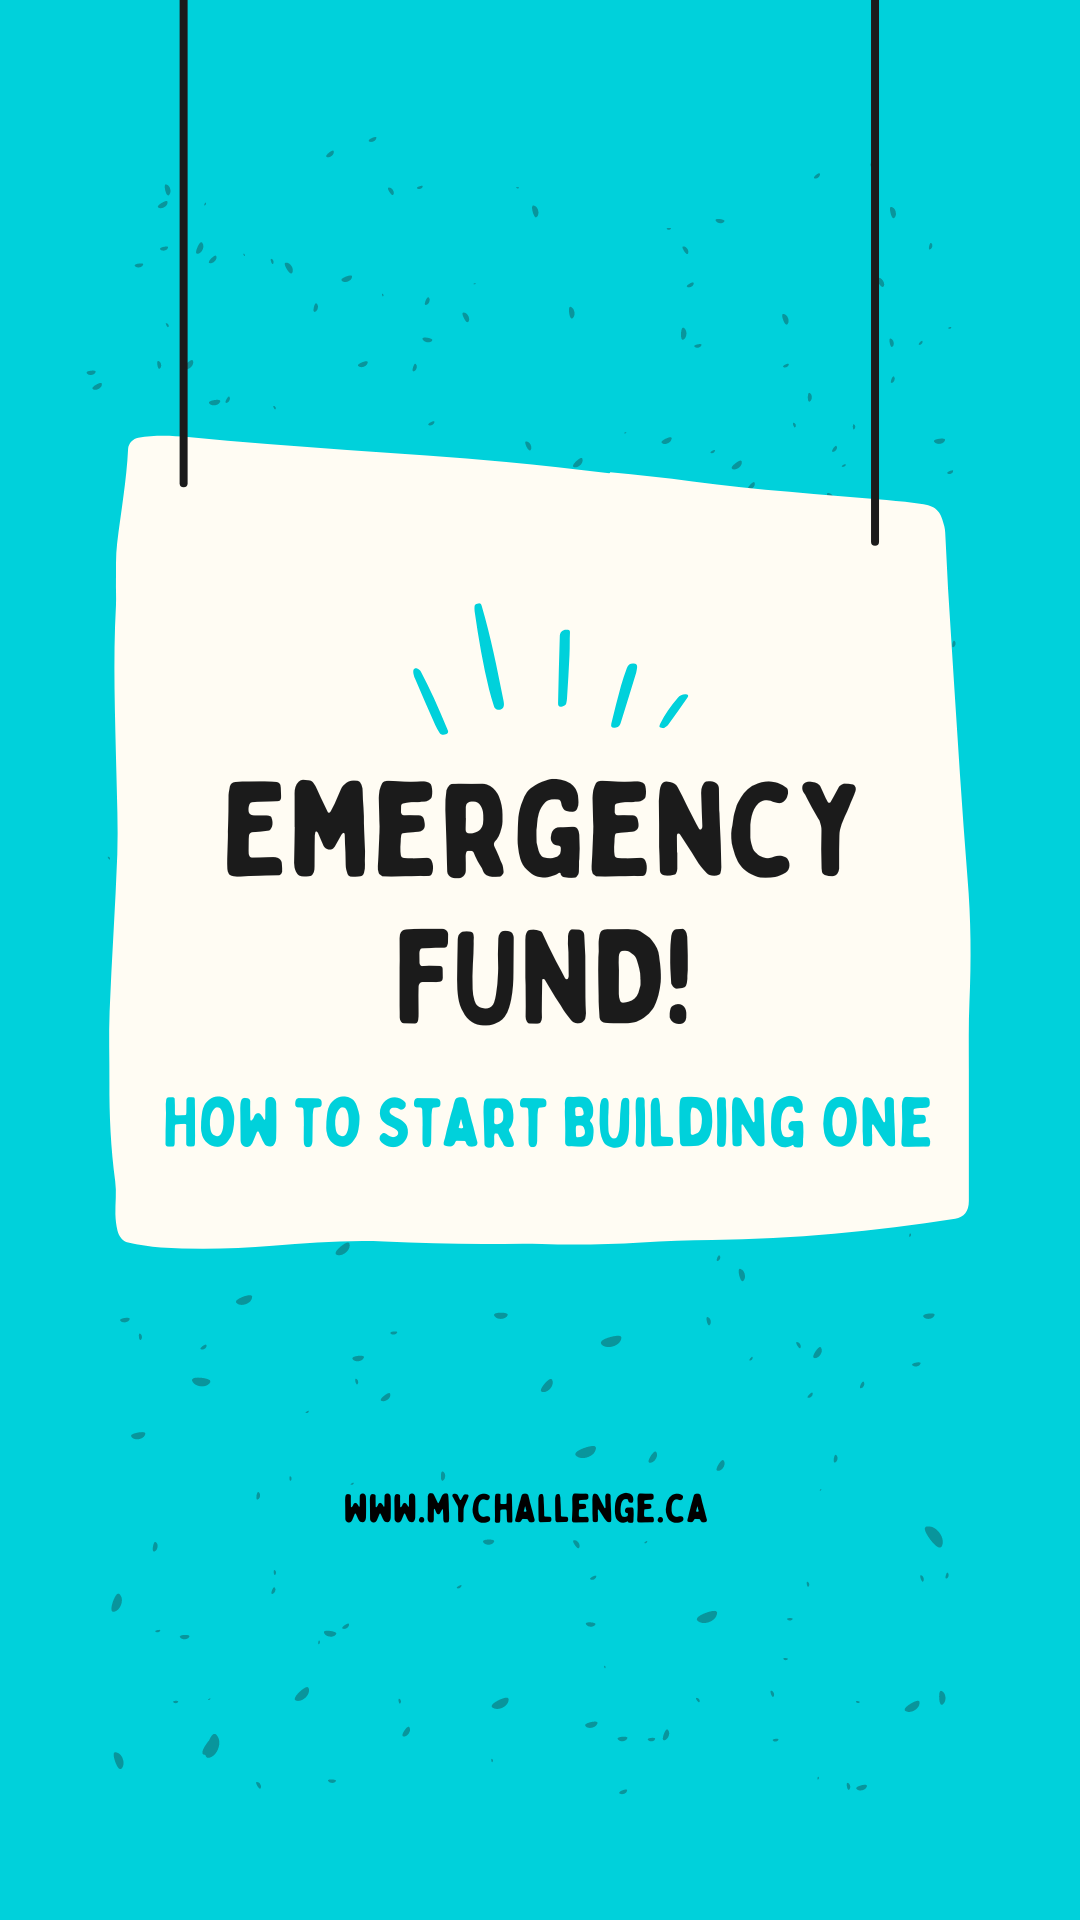 How to Start an Emergency Fund